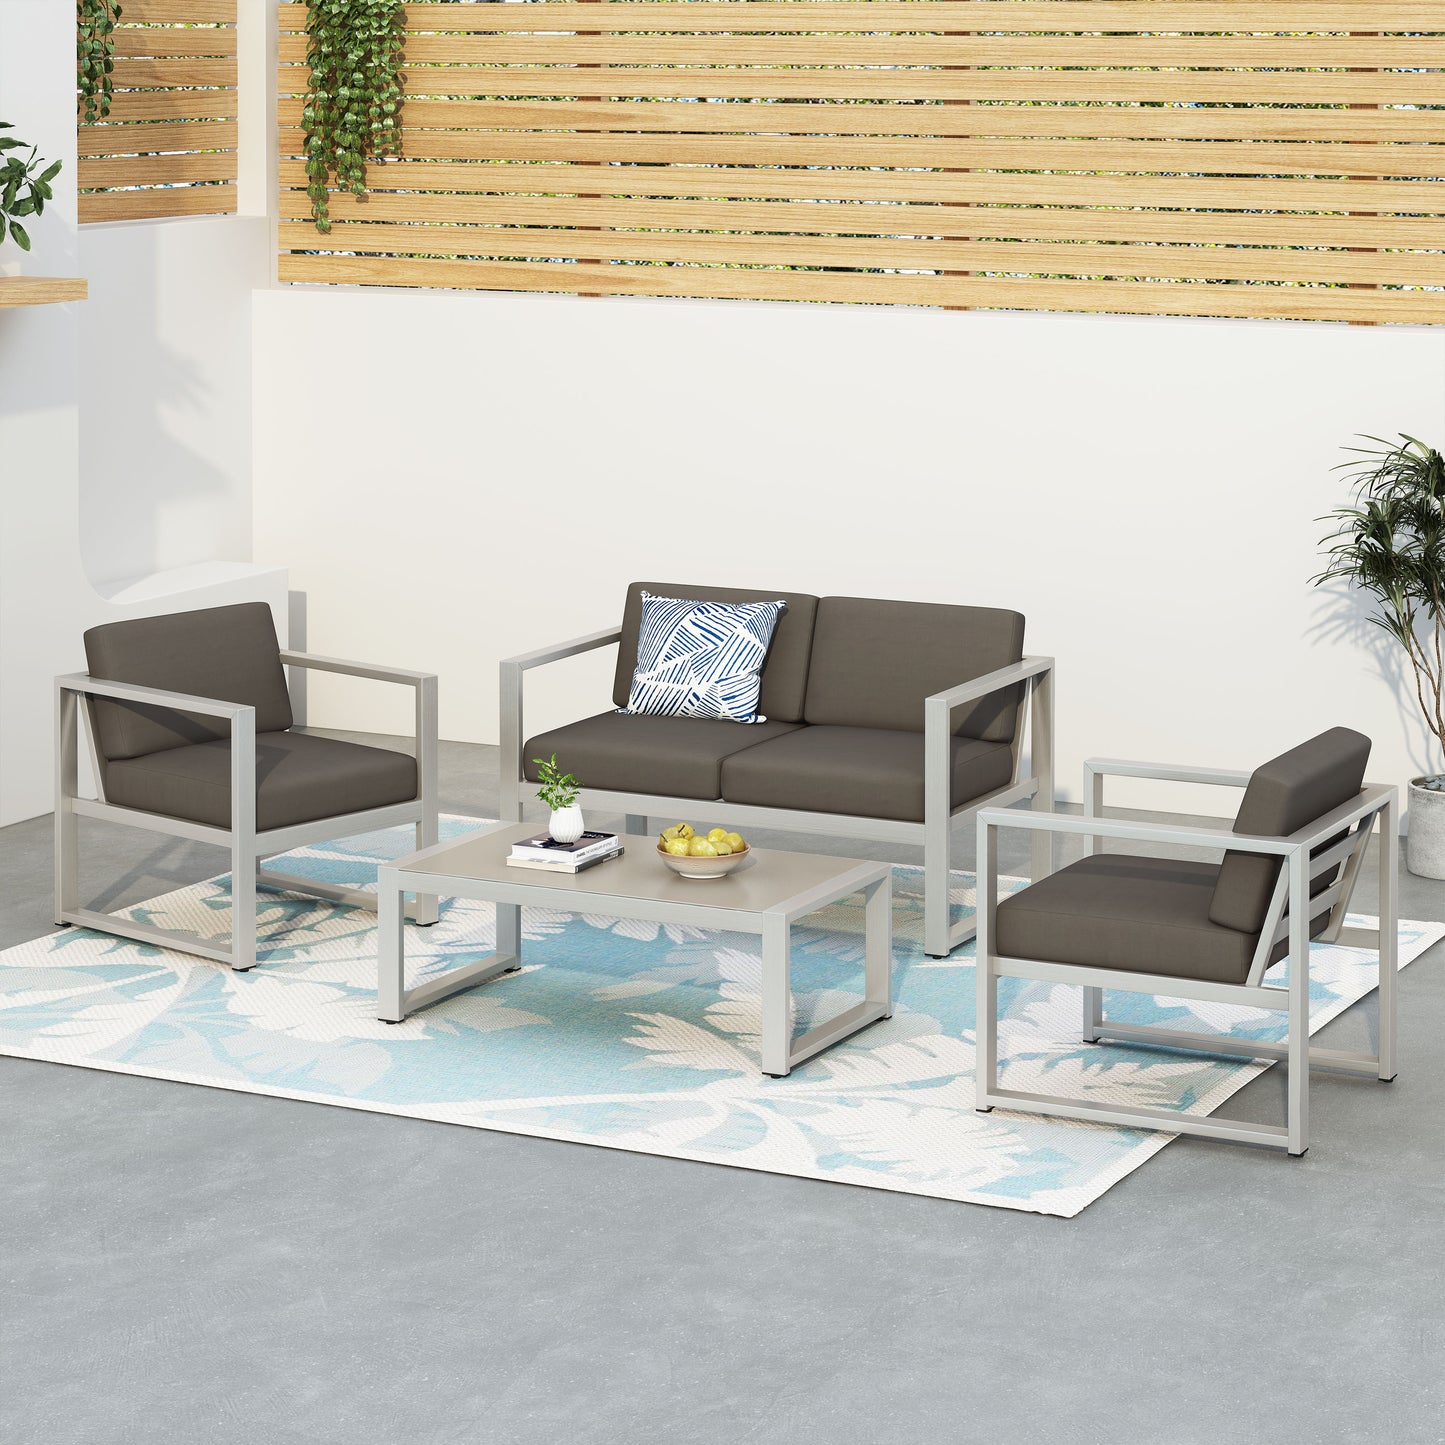 Noah Outdoor 4 Piece Silver Rust-Proof Aluminum Chat Set with Gray Water Resistant Cushions